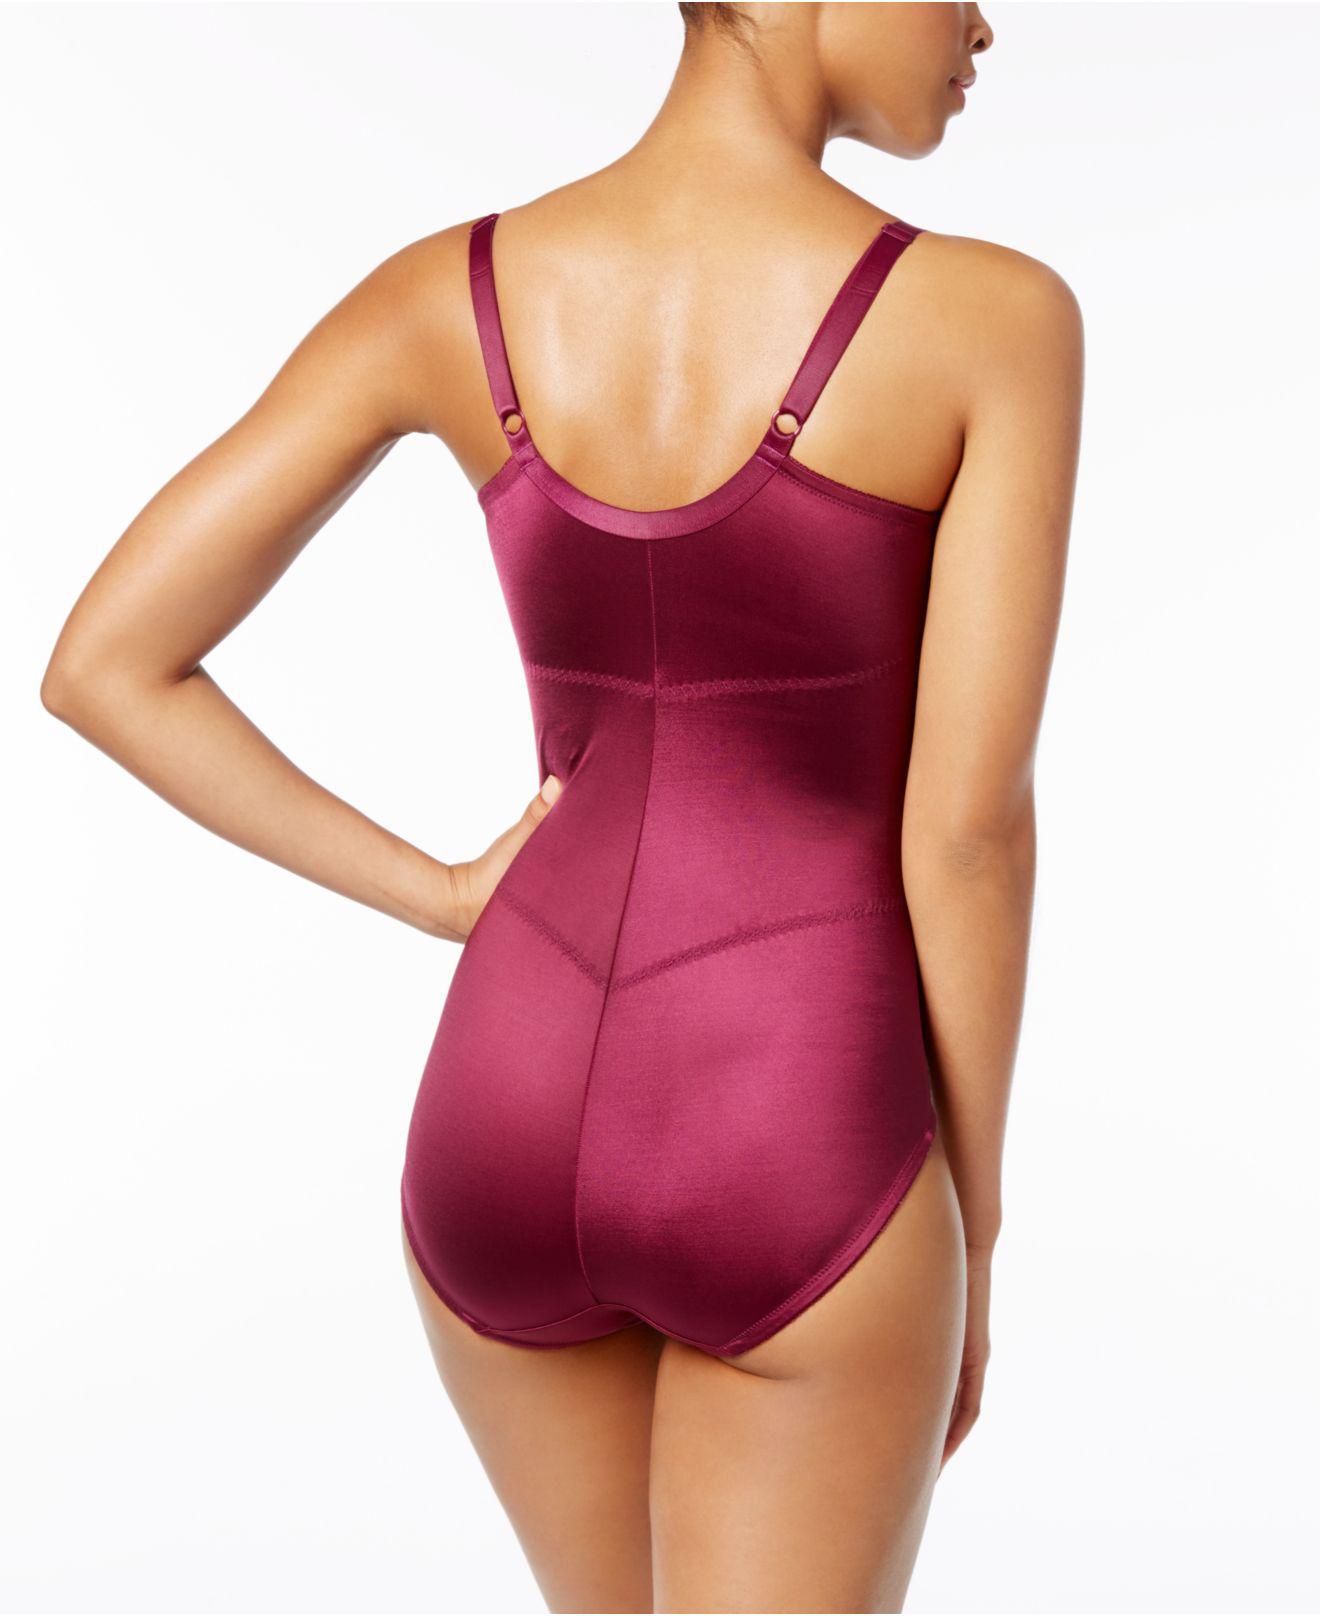 Maidenform Firm Control Embellished Unlined Body Shaper 1456 in Red